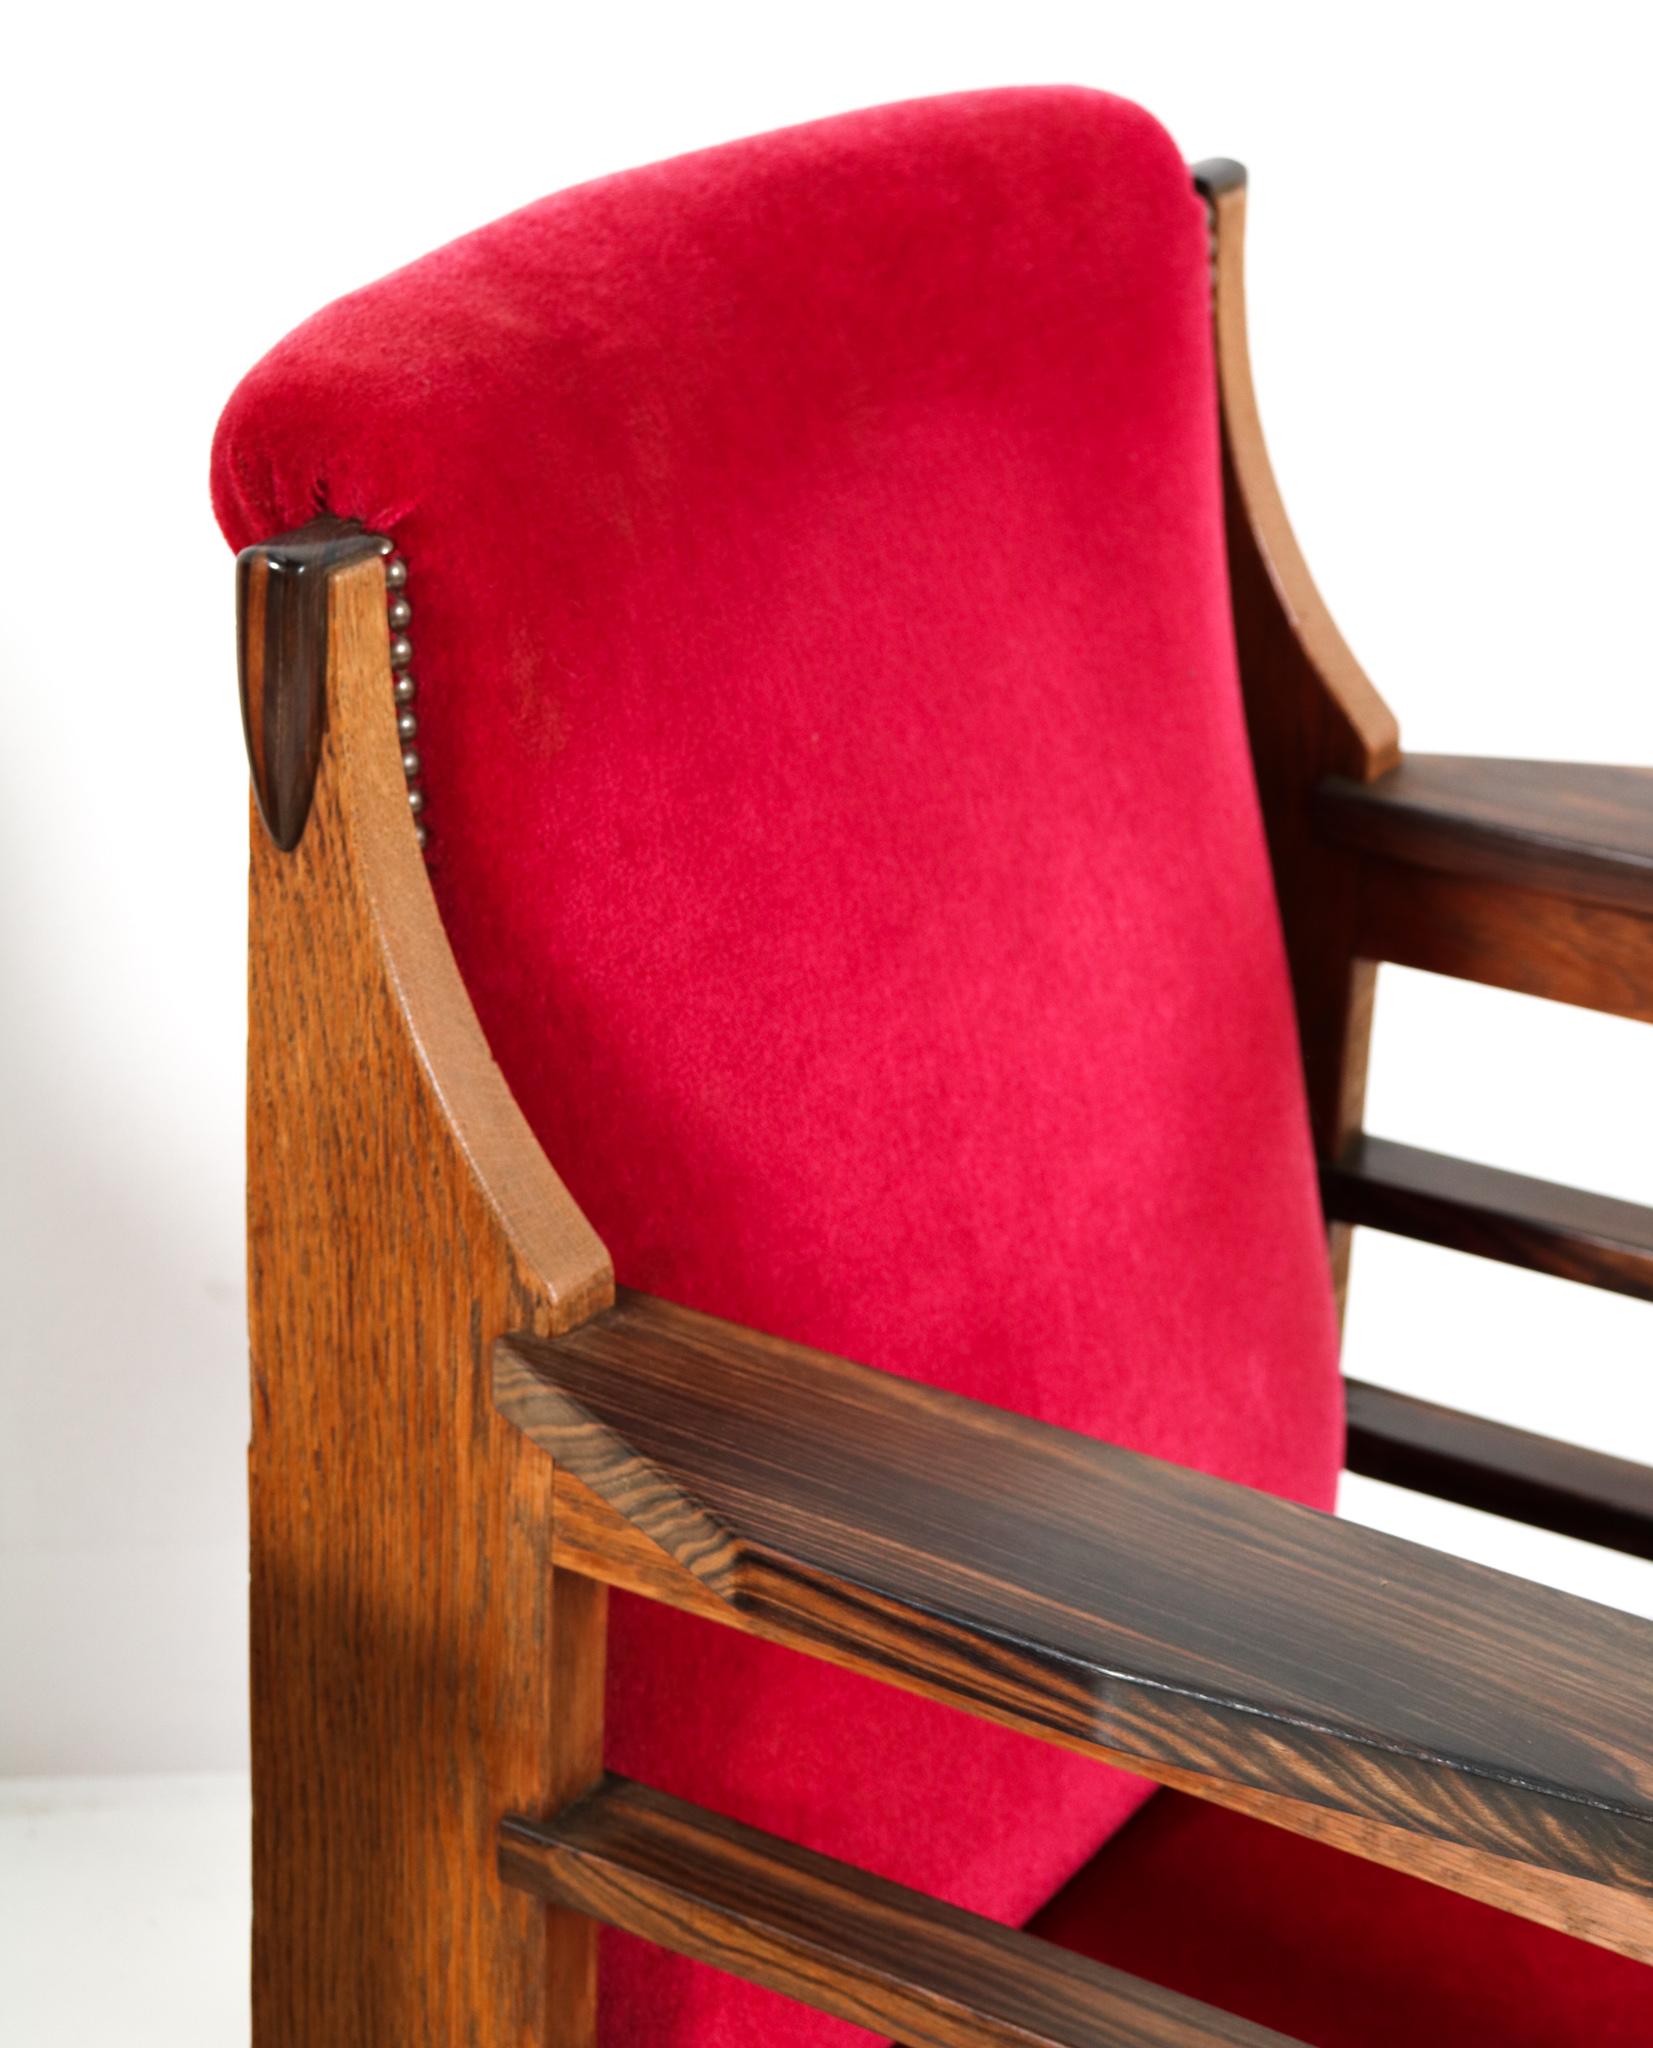 Pair of Art Deco Amsterdamse School Lounge Chairs by Anton Lucas Leiden, 1920s For Sale 2